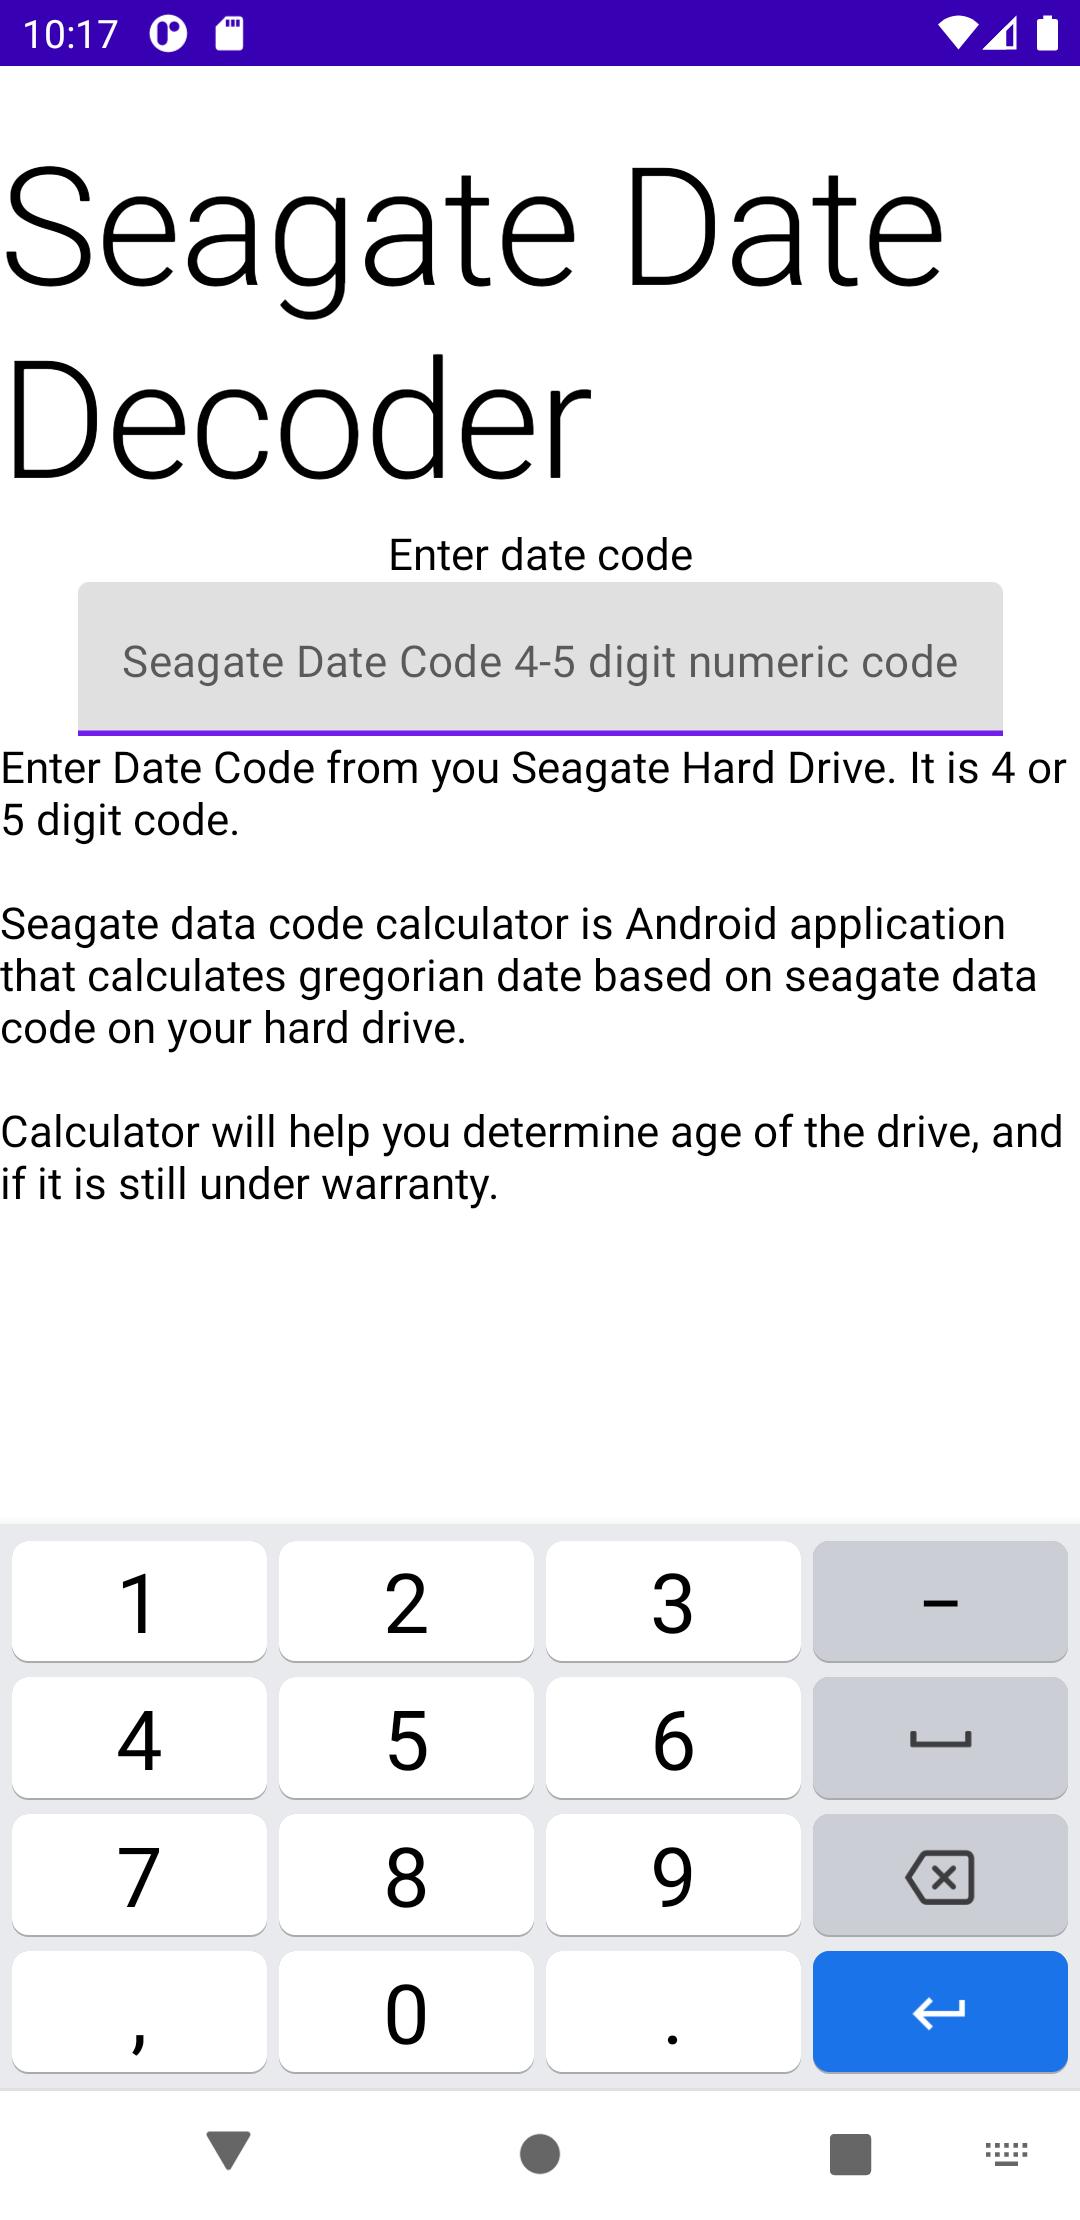 Seagate Date Decoder for Android - APK Download